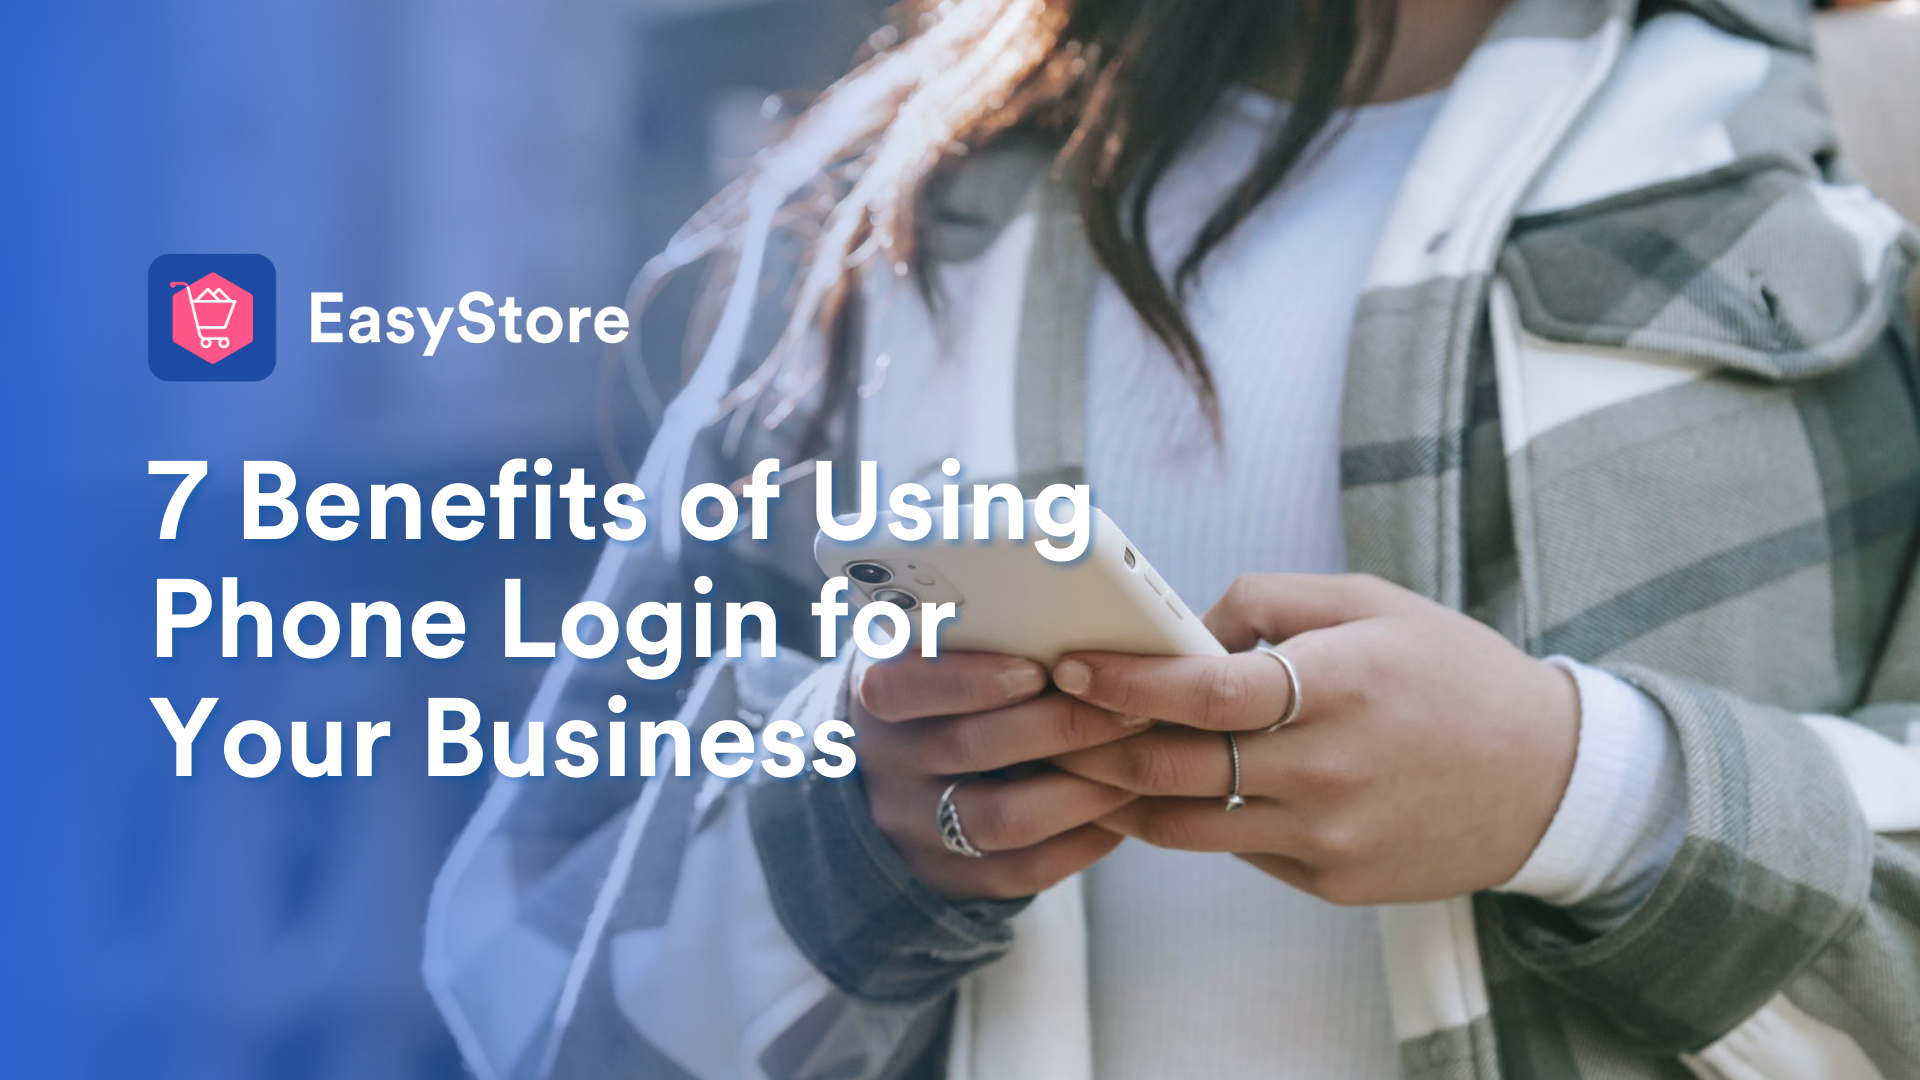 7 Benefits of Using Phone Login for Your Business | EasyStore